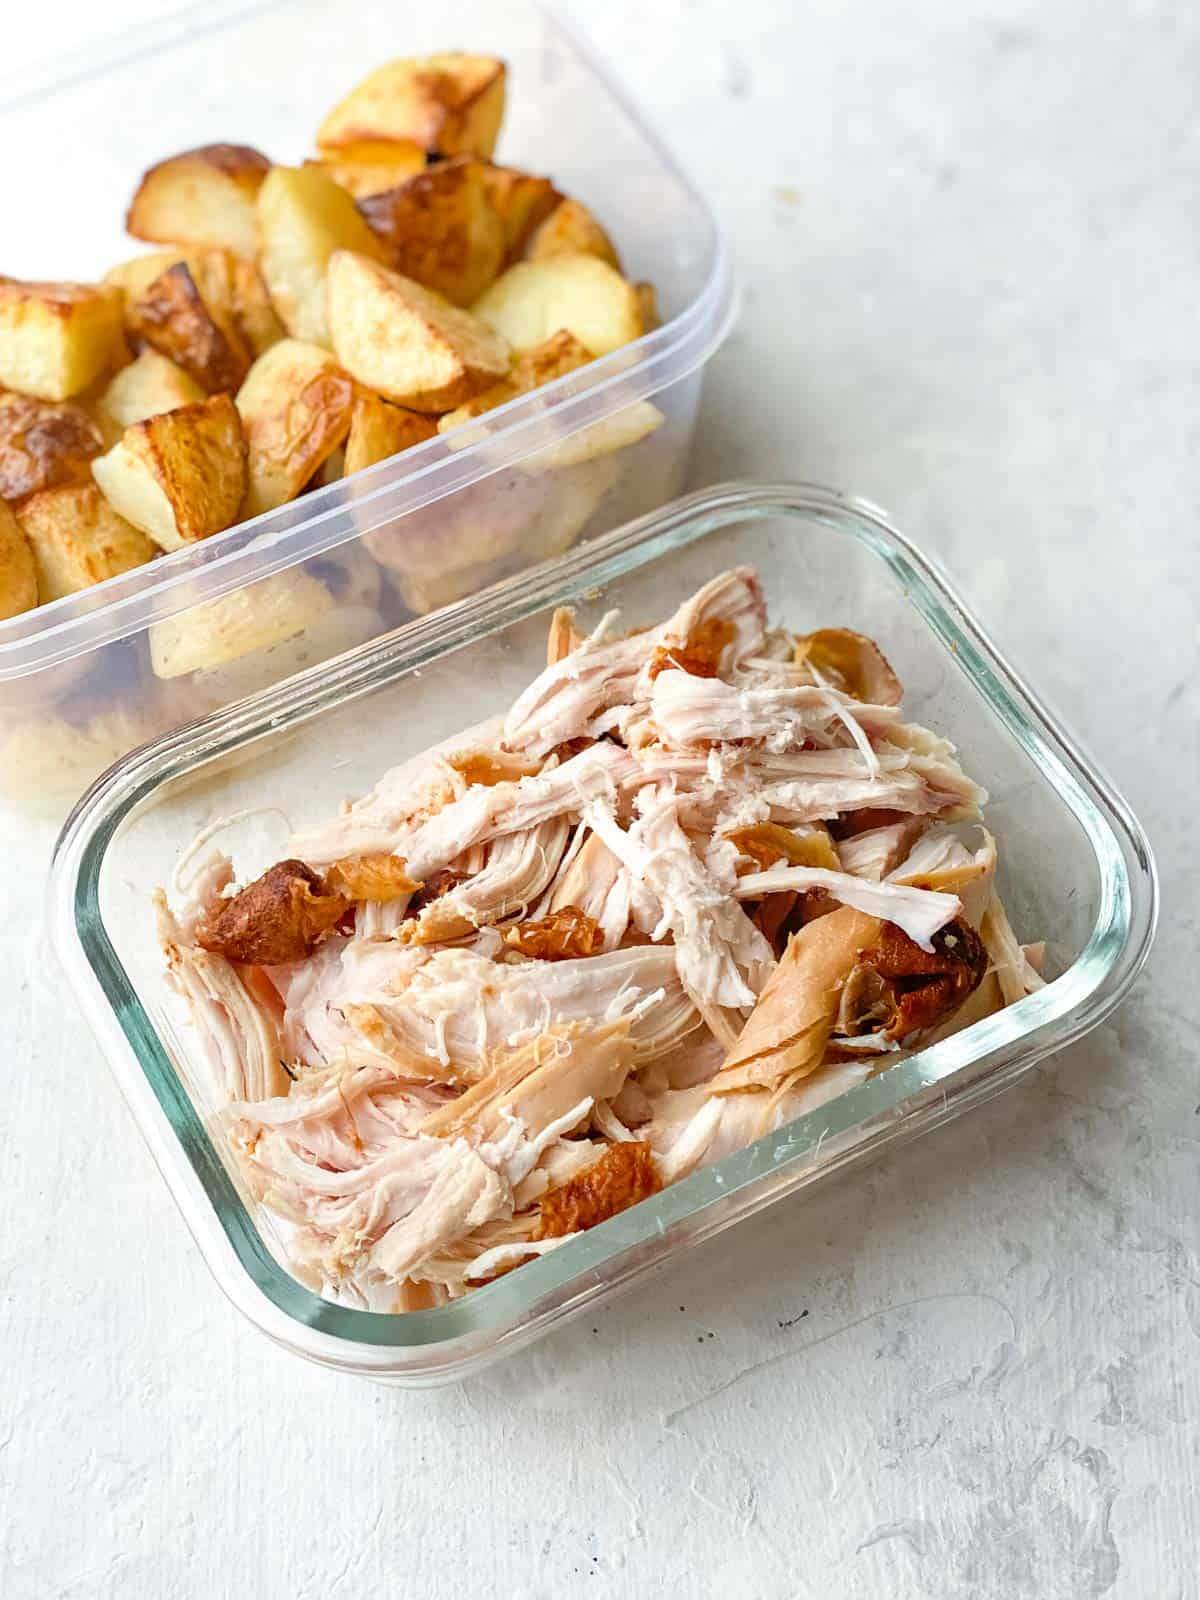 Leftover chicken and roast potatoes in takeaway containers